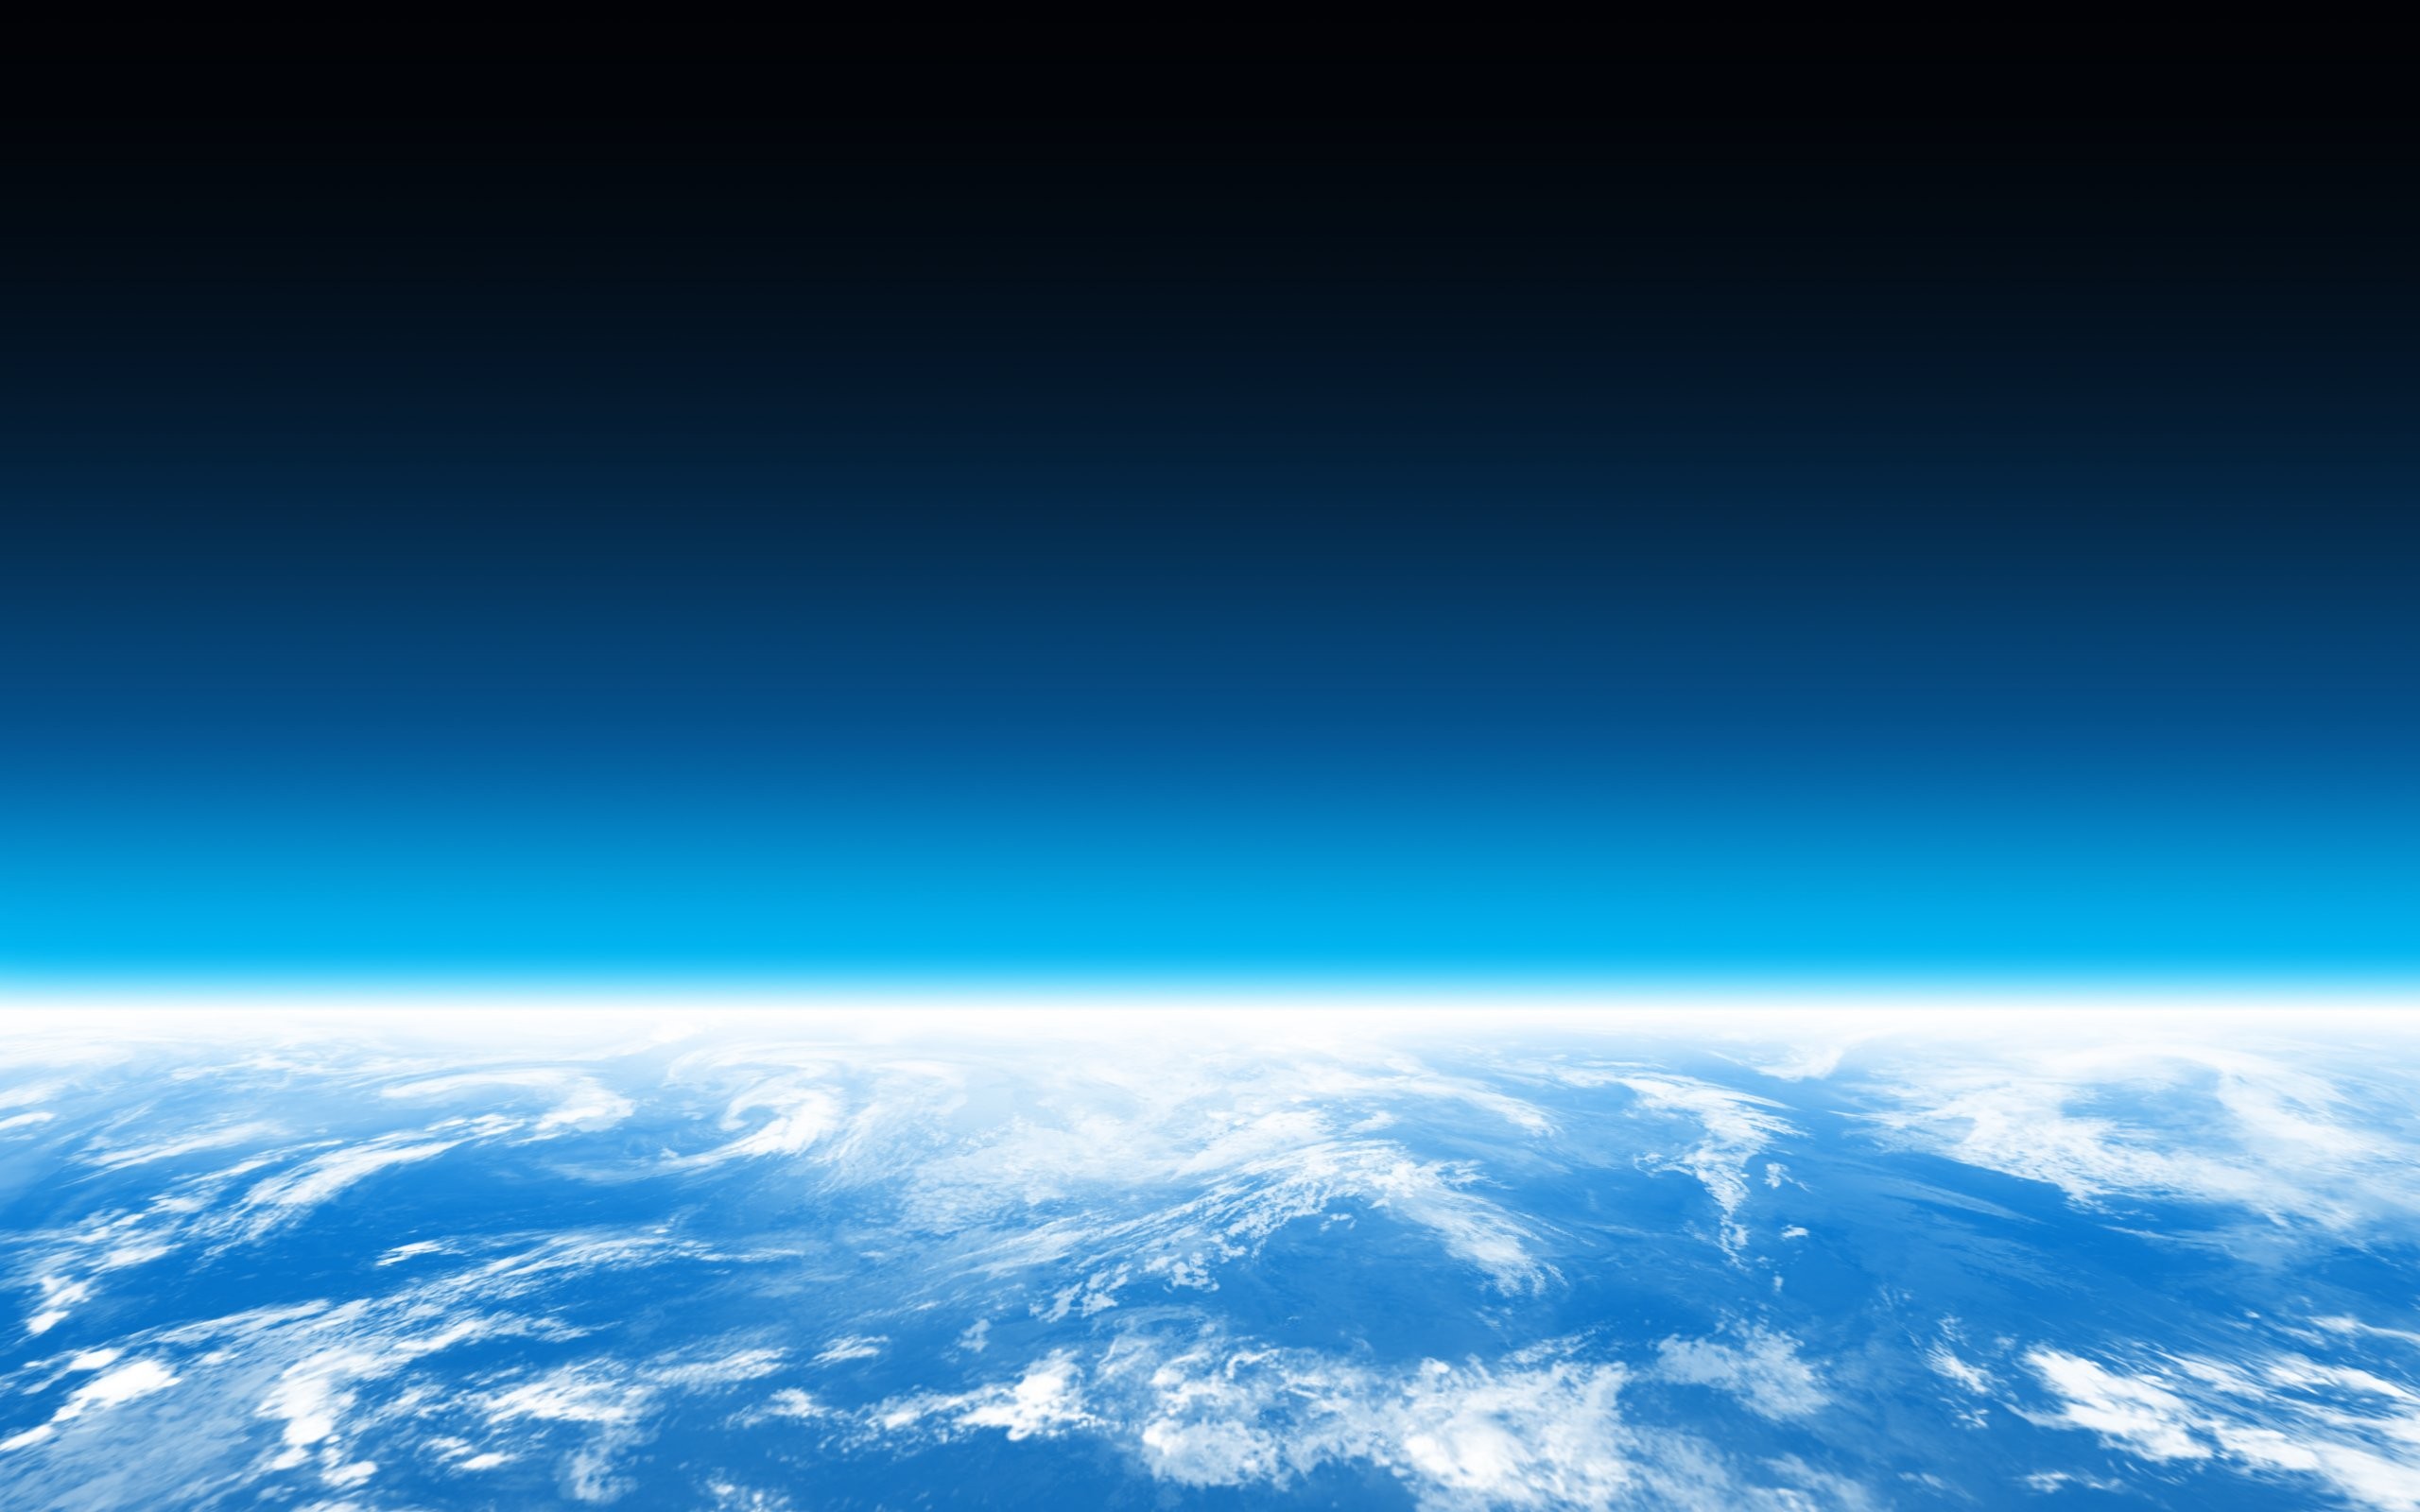 General 2560x1600 space Earth atmosphere planet